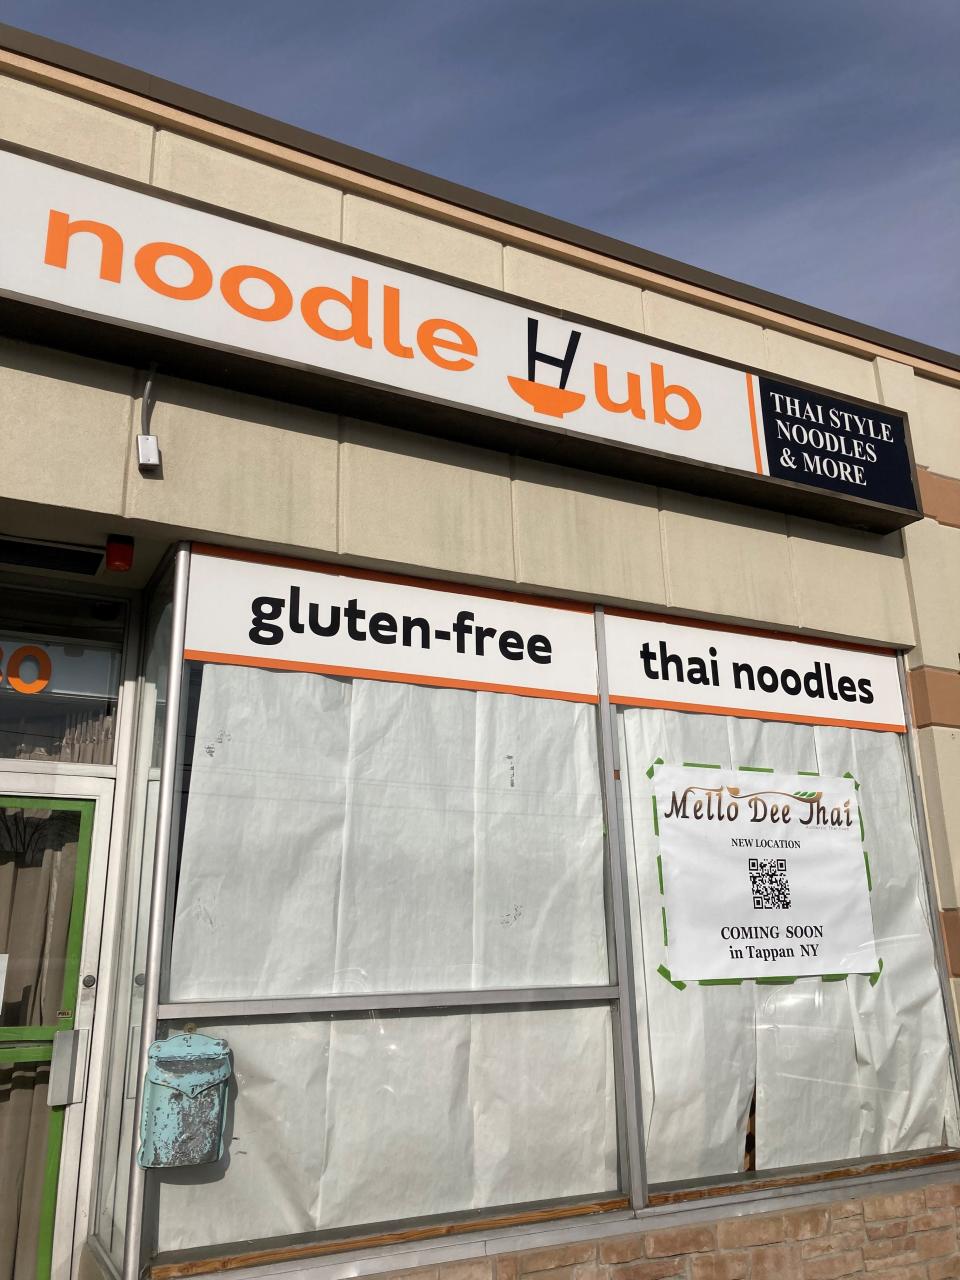 Mello Dee Thai in Valley Cottage is moving to the old Noodle Hub space in Tappan in March. Photographed Jan. 20, 2022.